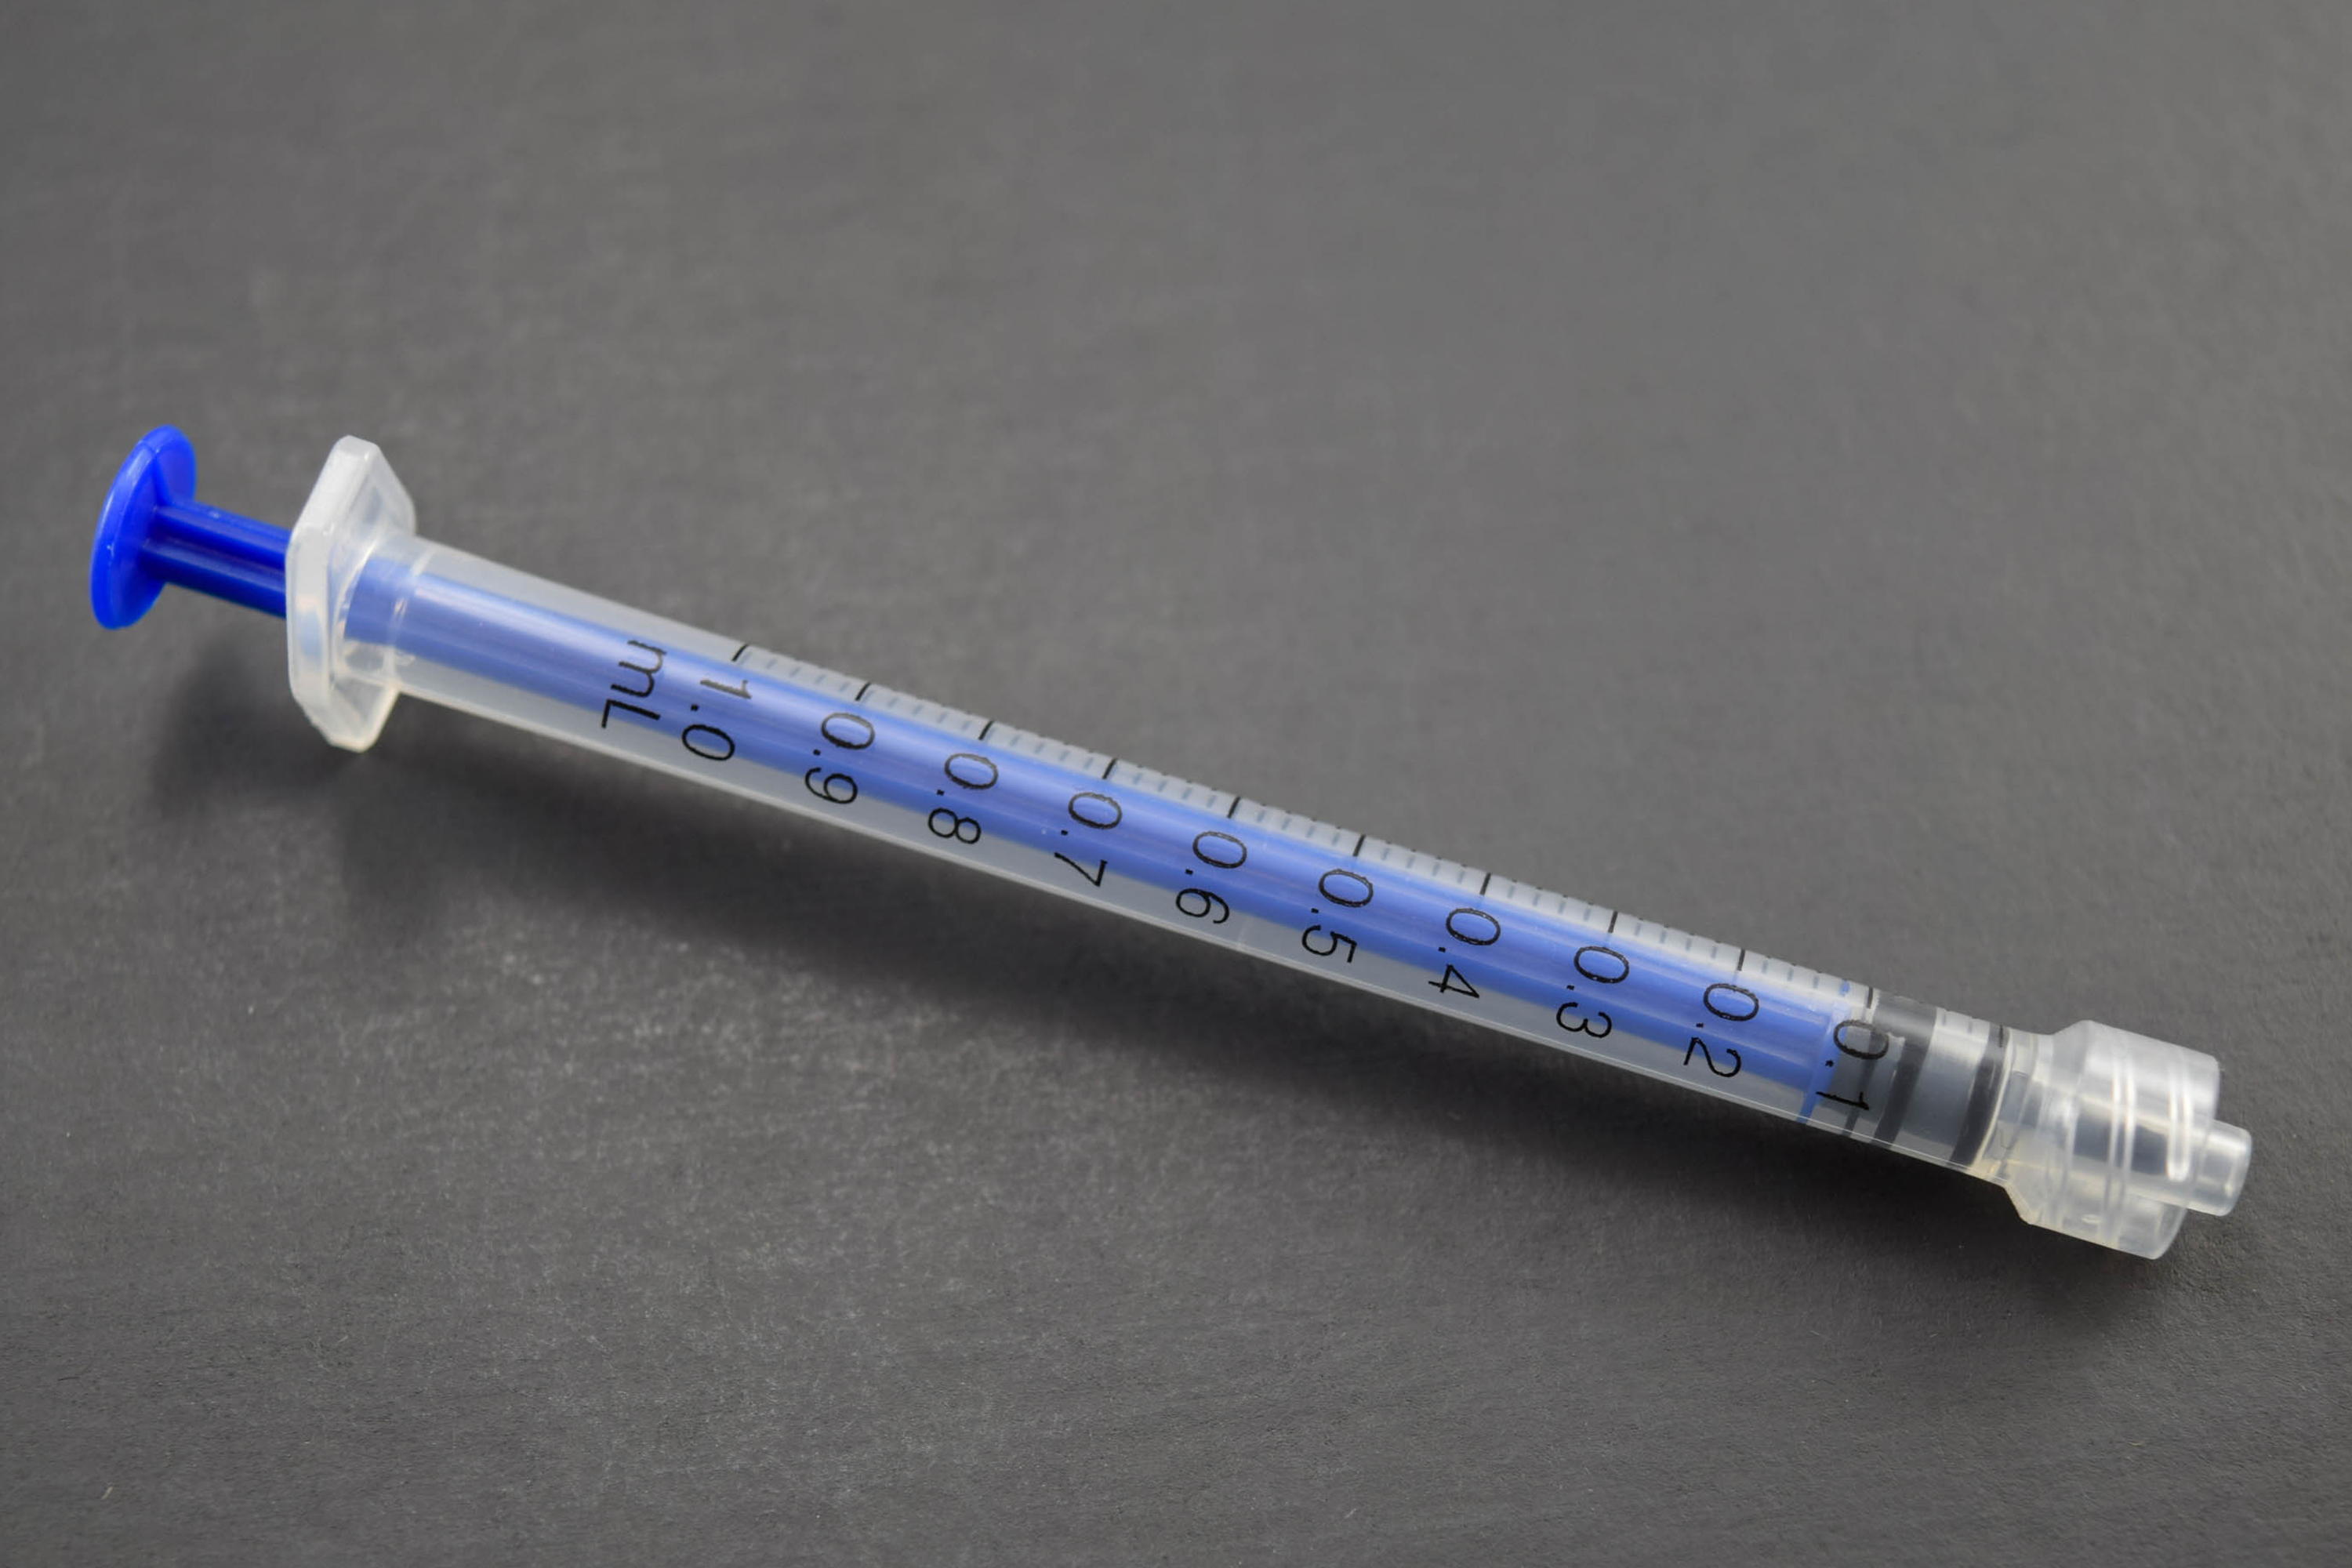 Air-Tite™ Sterile Syringes with Needles - Luer Lock